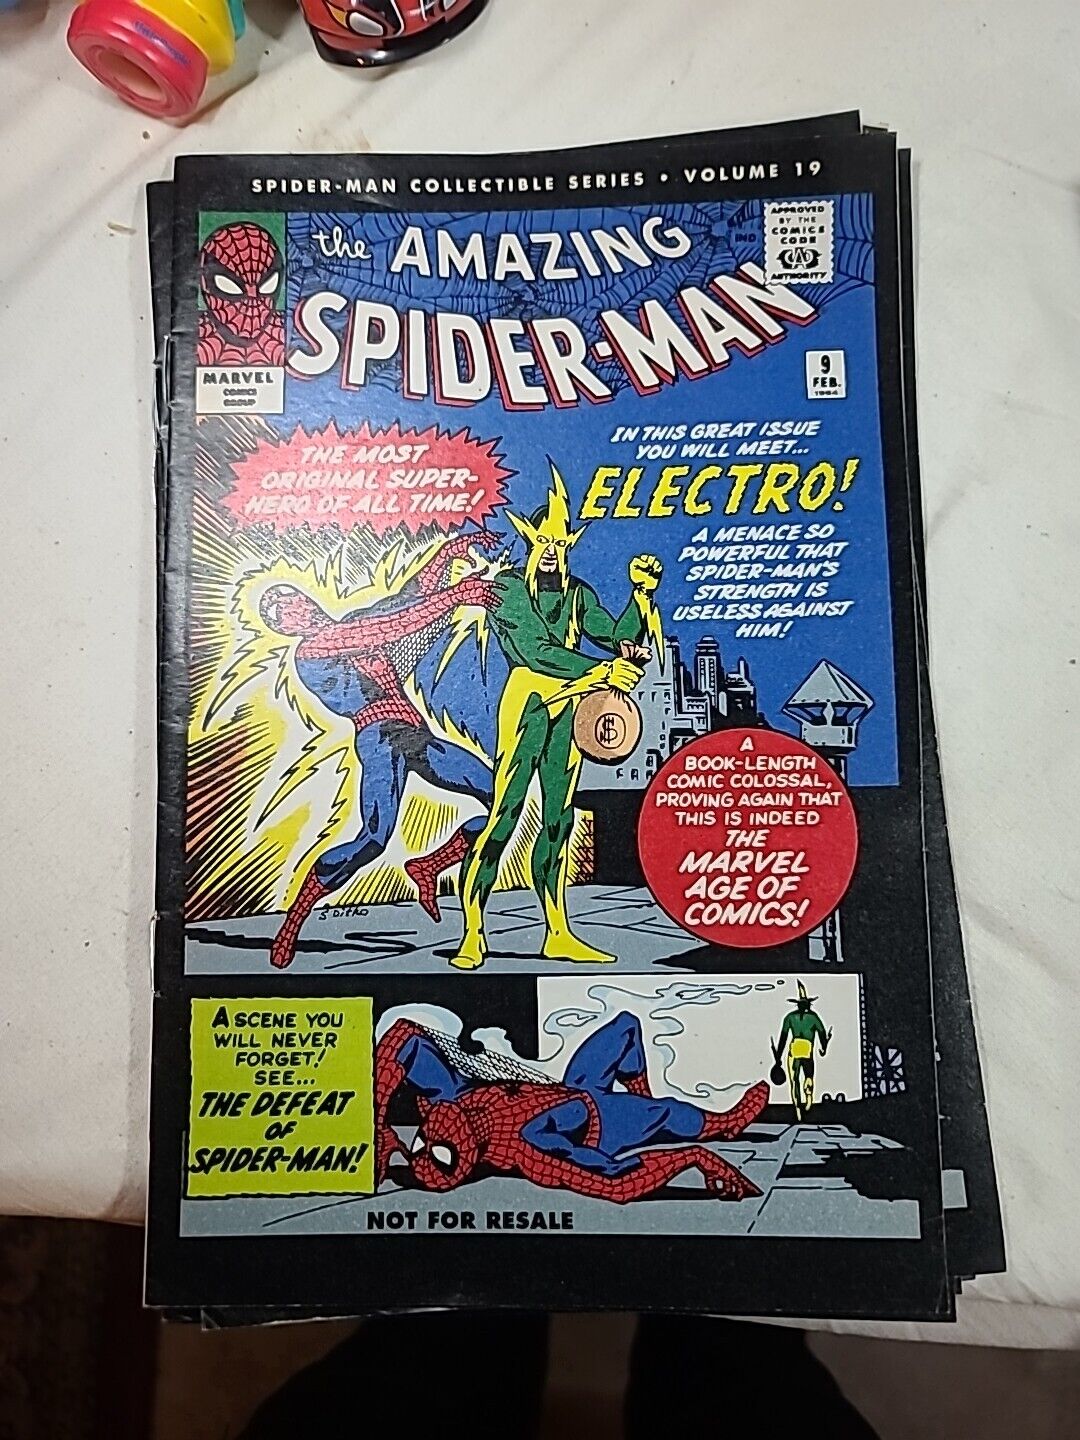 The Amazing Spider-Man #9 1st Electro Spiderman Collectible Series